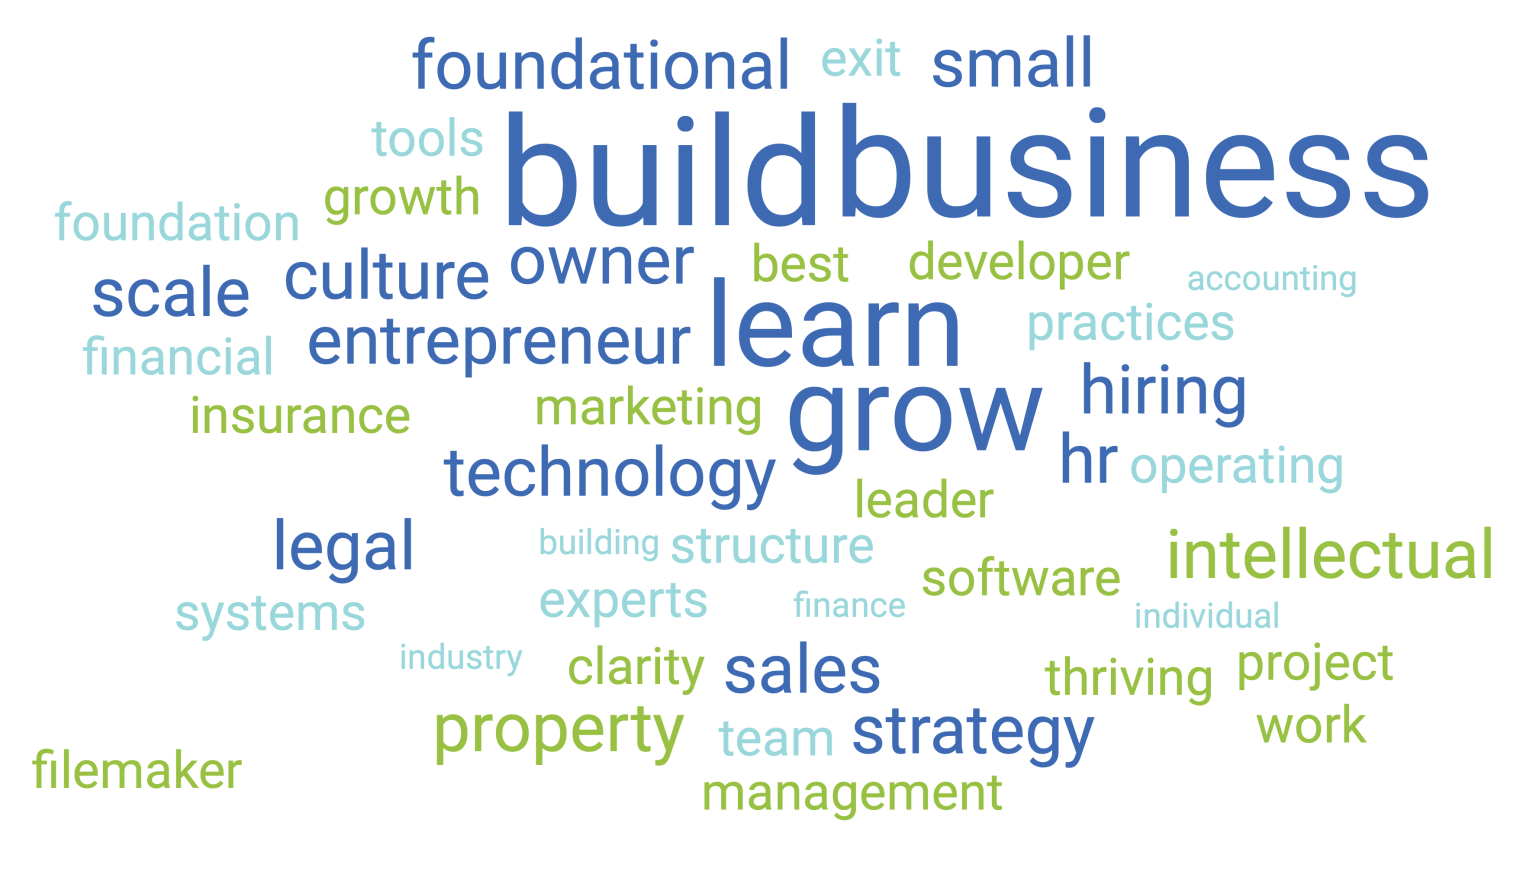 Word Cloud of terms related to business growth and strategy.